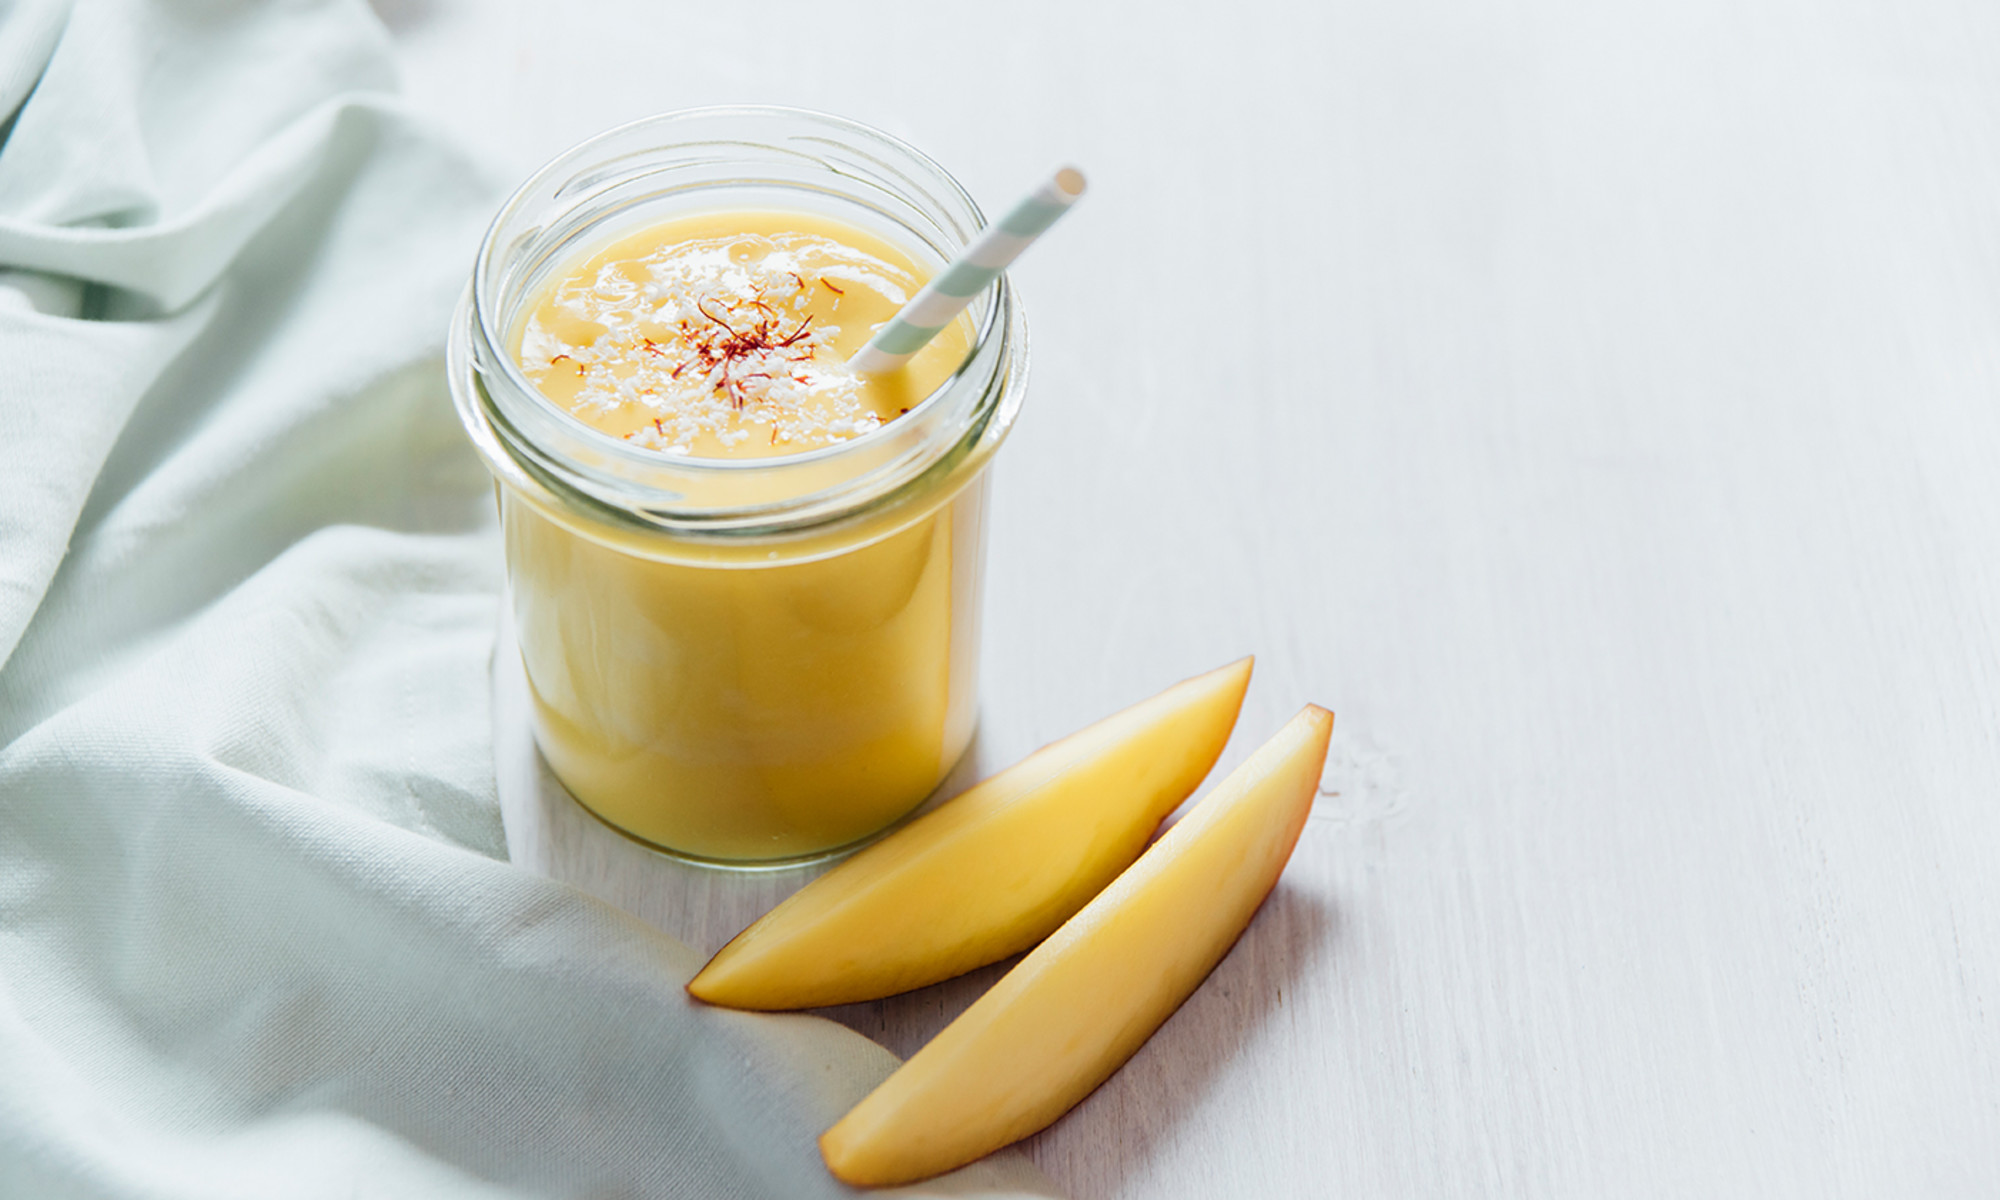 This Refreshing Cashew Butter Smoothie Can Restore Collagen & Keep You Full*